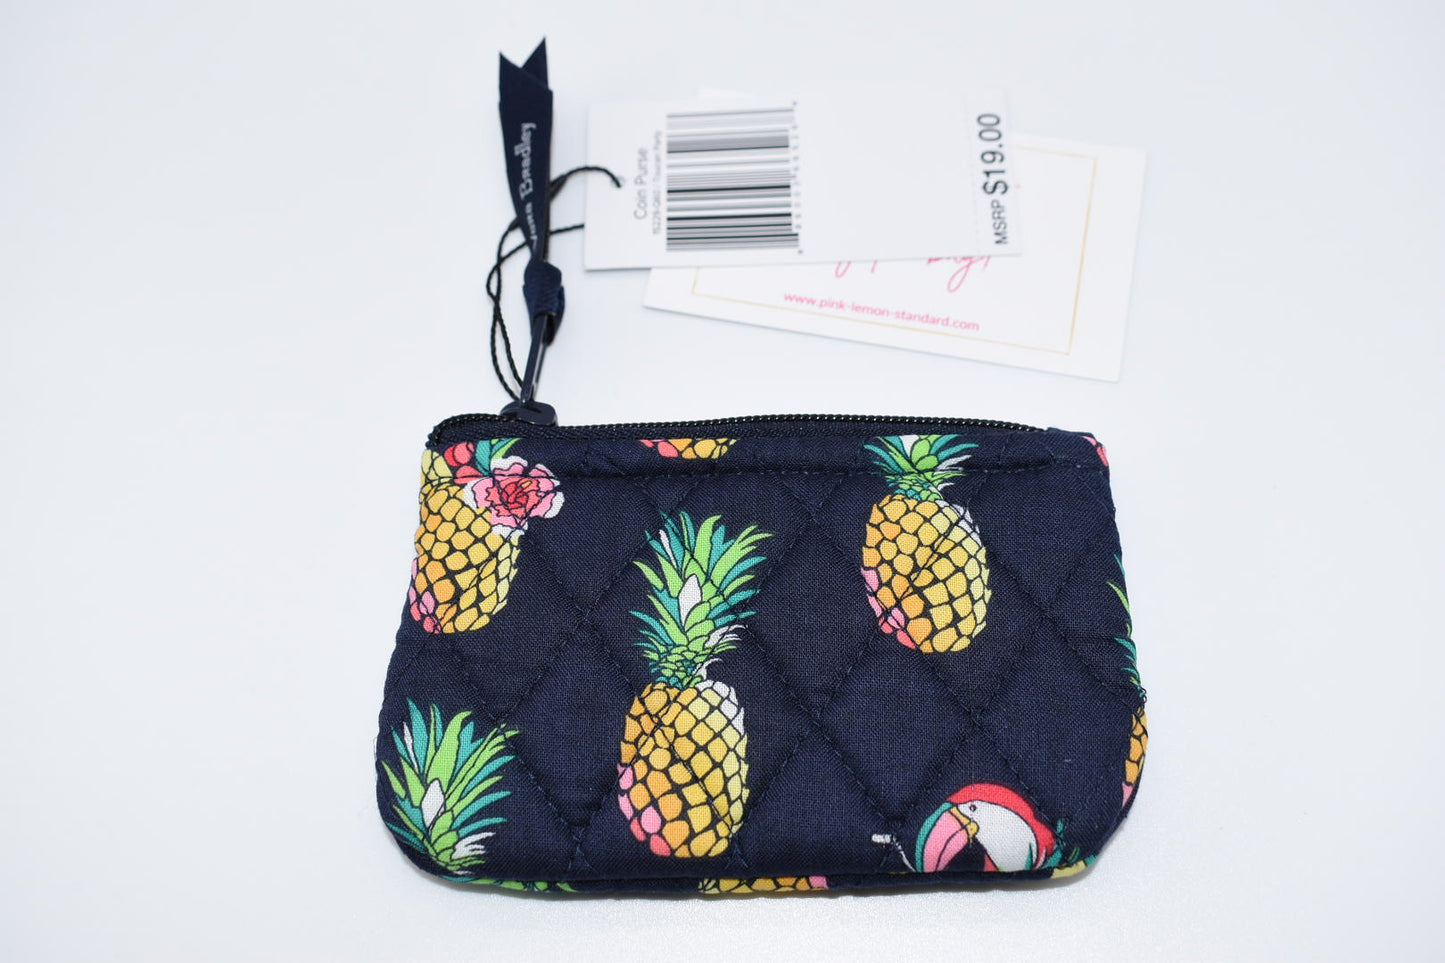 Vera Bradley Coin Purse in "Toucan Party"Pattern